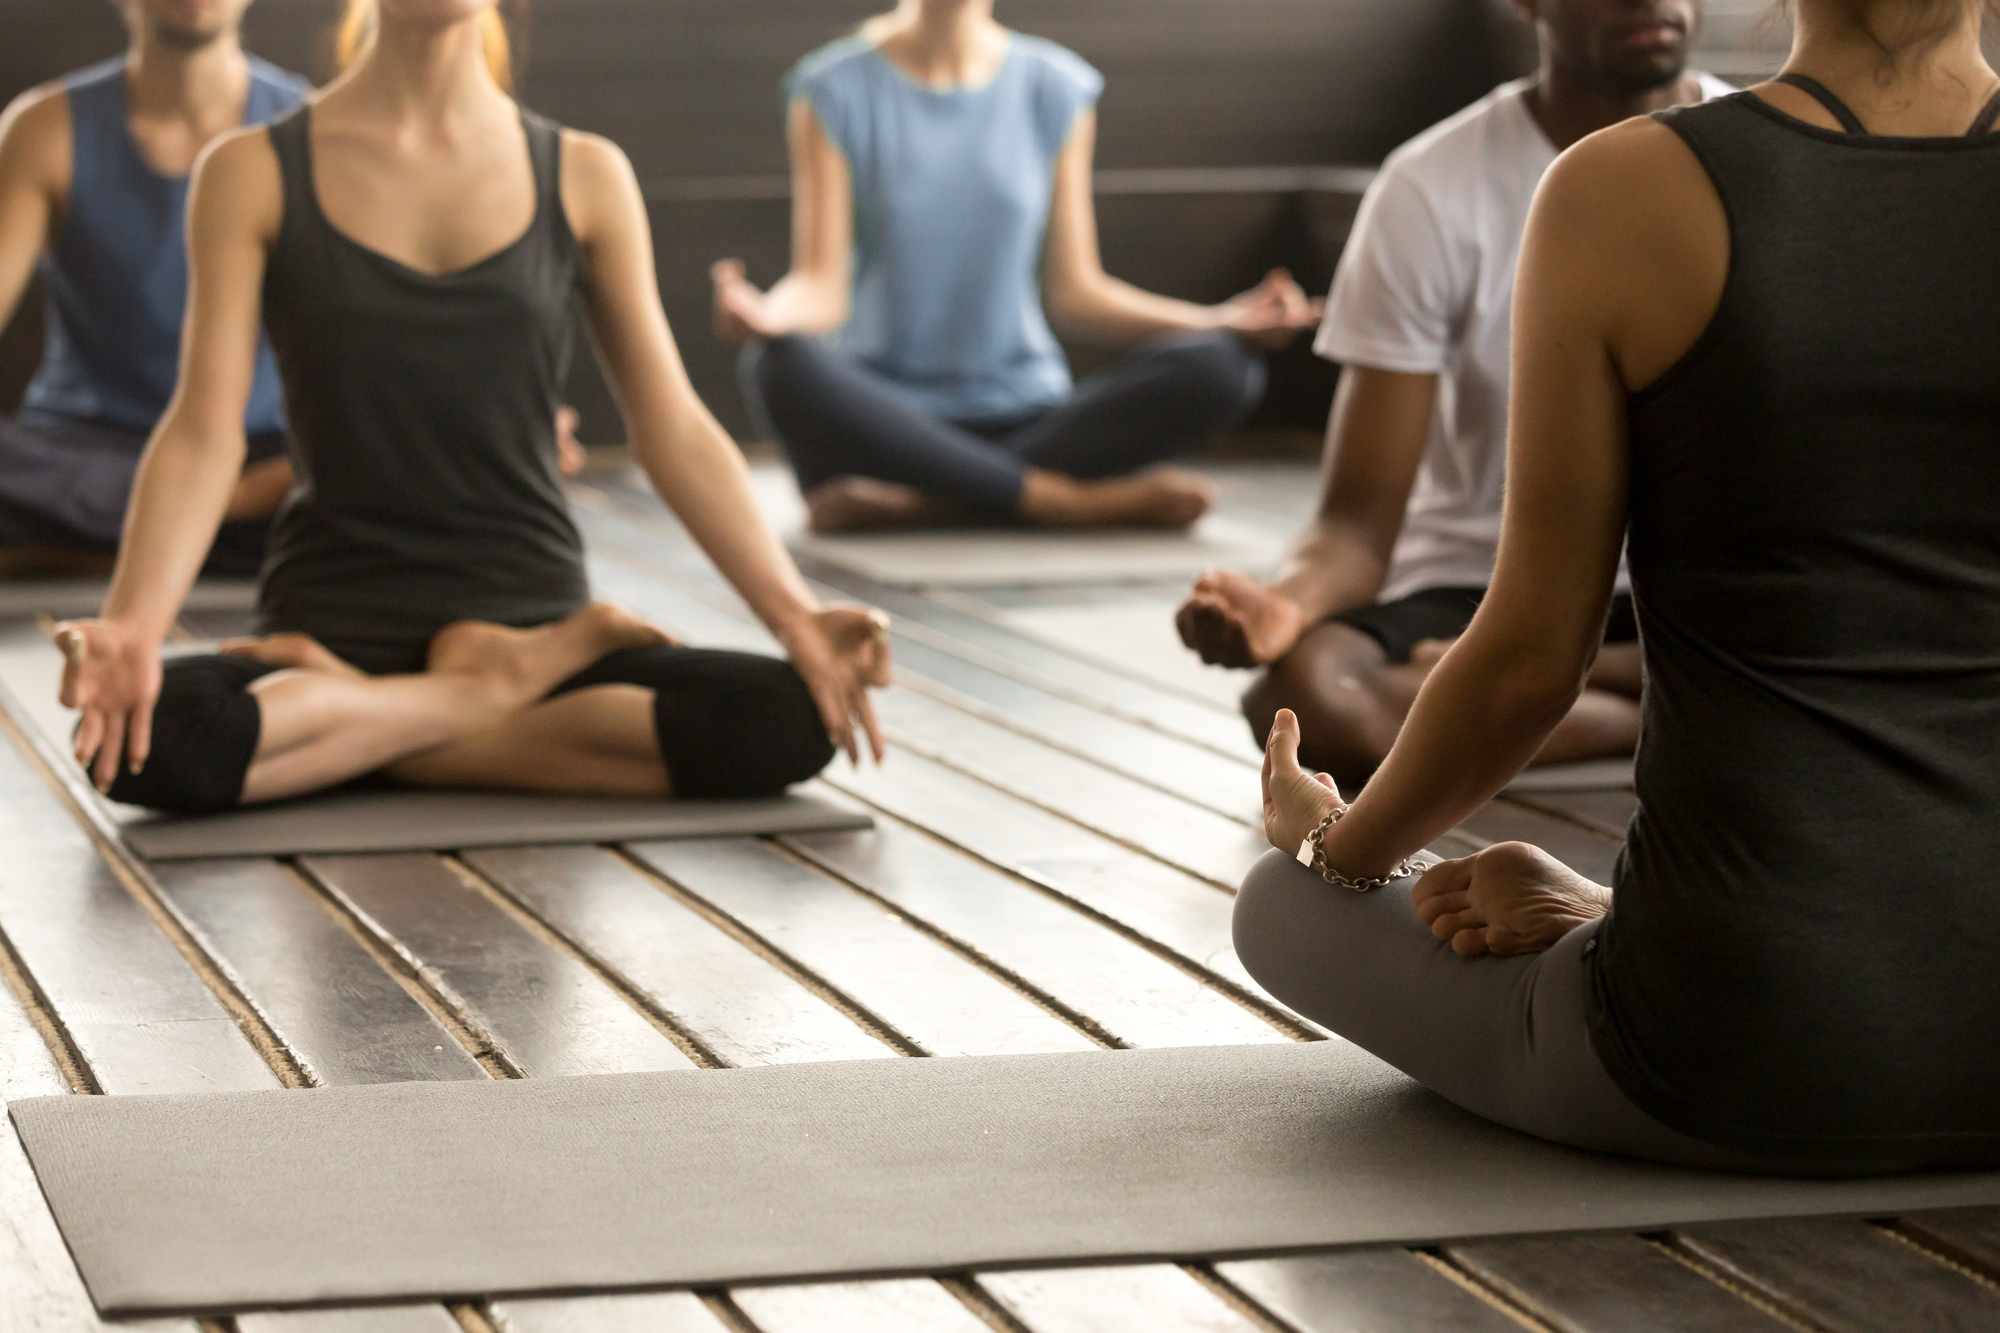 A Group of People Sitting on Yoga Mats